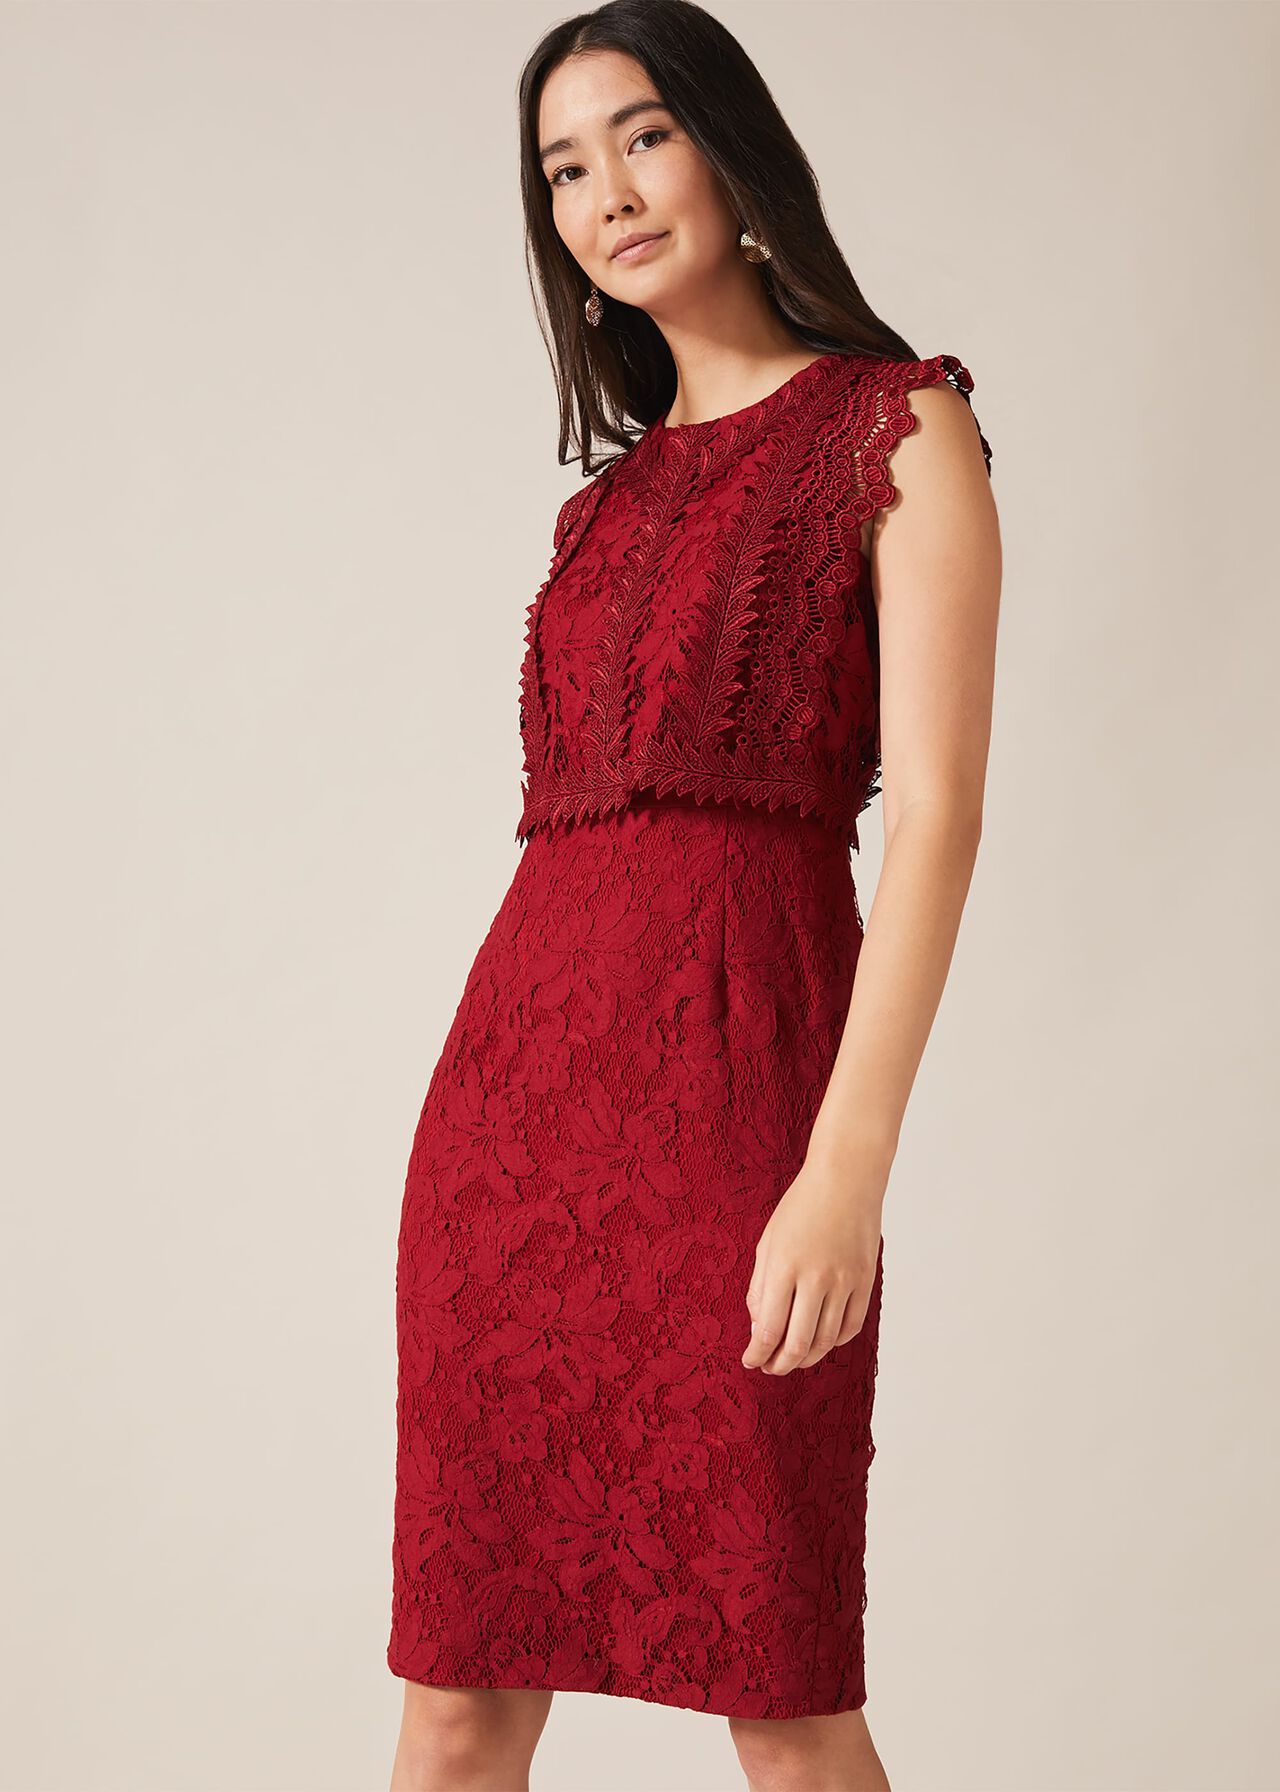 Alex Lace Double Layer Dress | Phase Eight